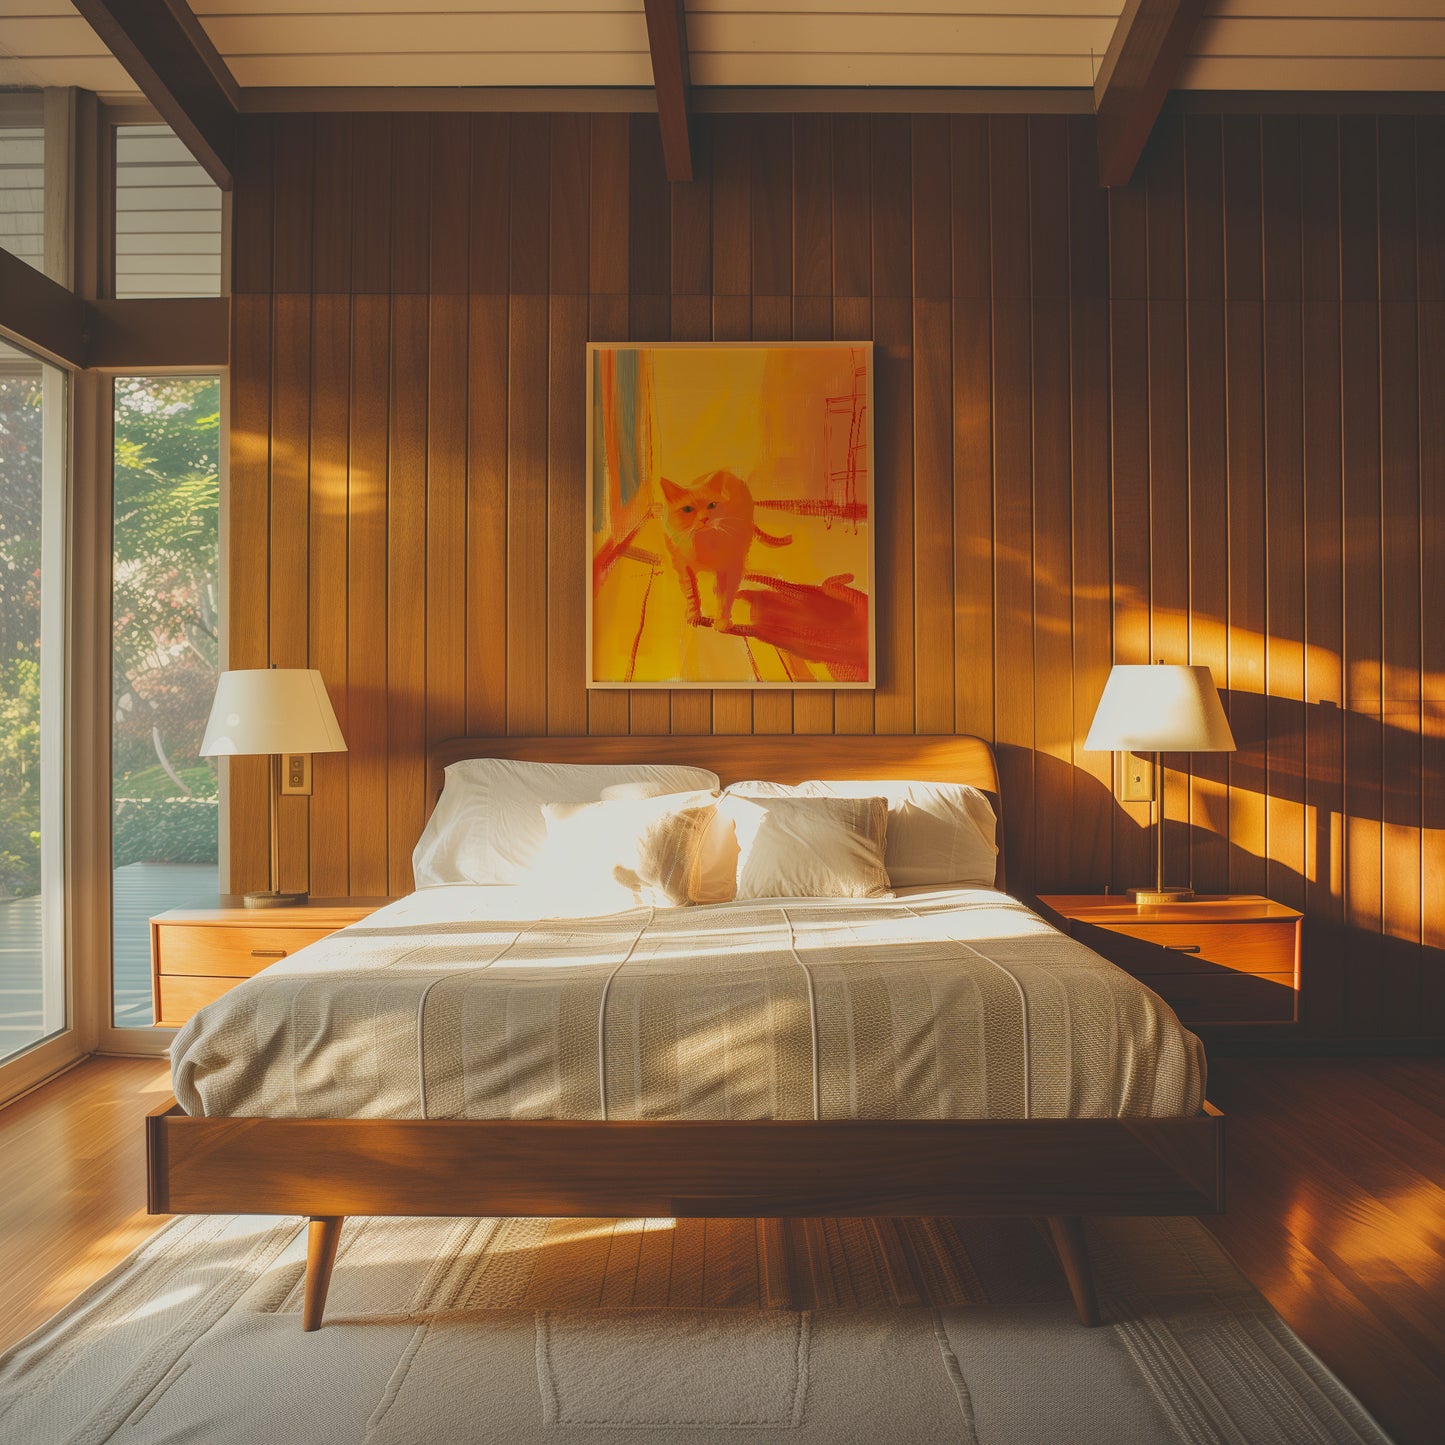 Cozy bedroom with warm lighting, wooden walls, and modern art above the bed.